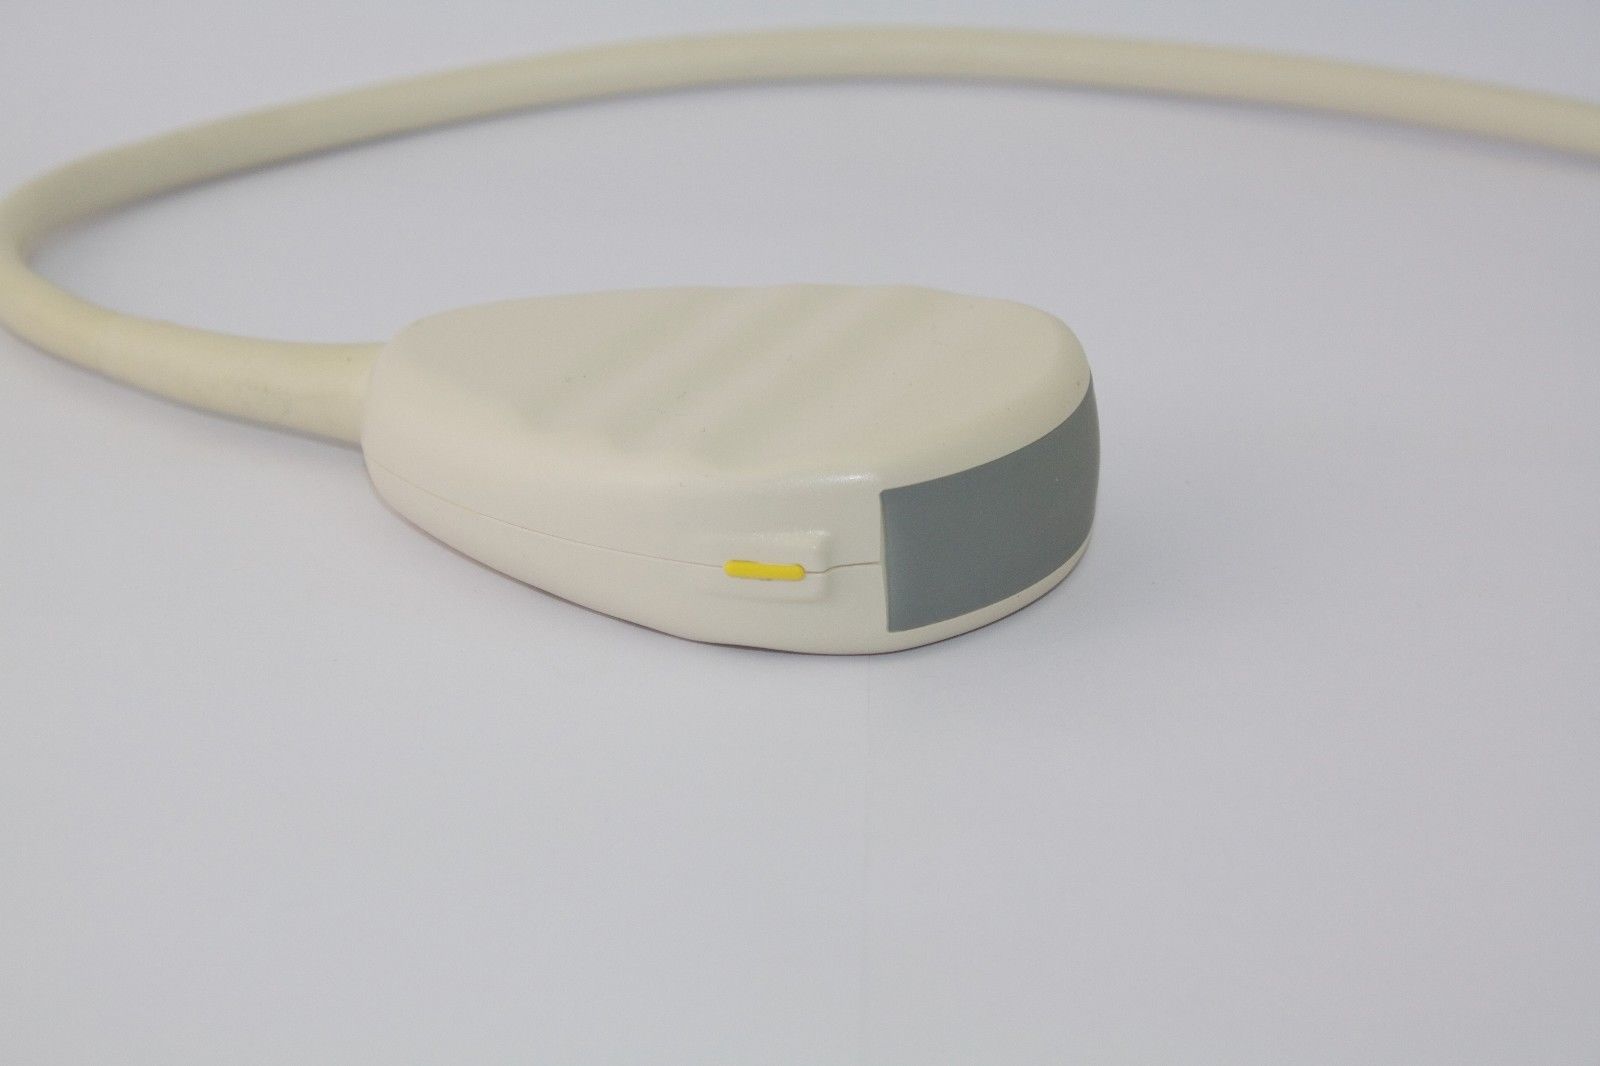 Philips ATL C5-2 40R Curved Array Ultrasound Transducer HDI5000 4000-574-03